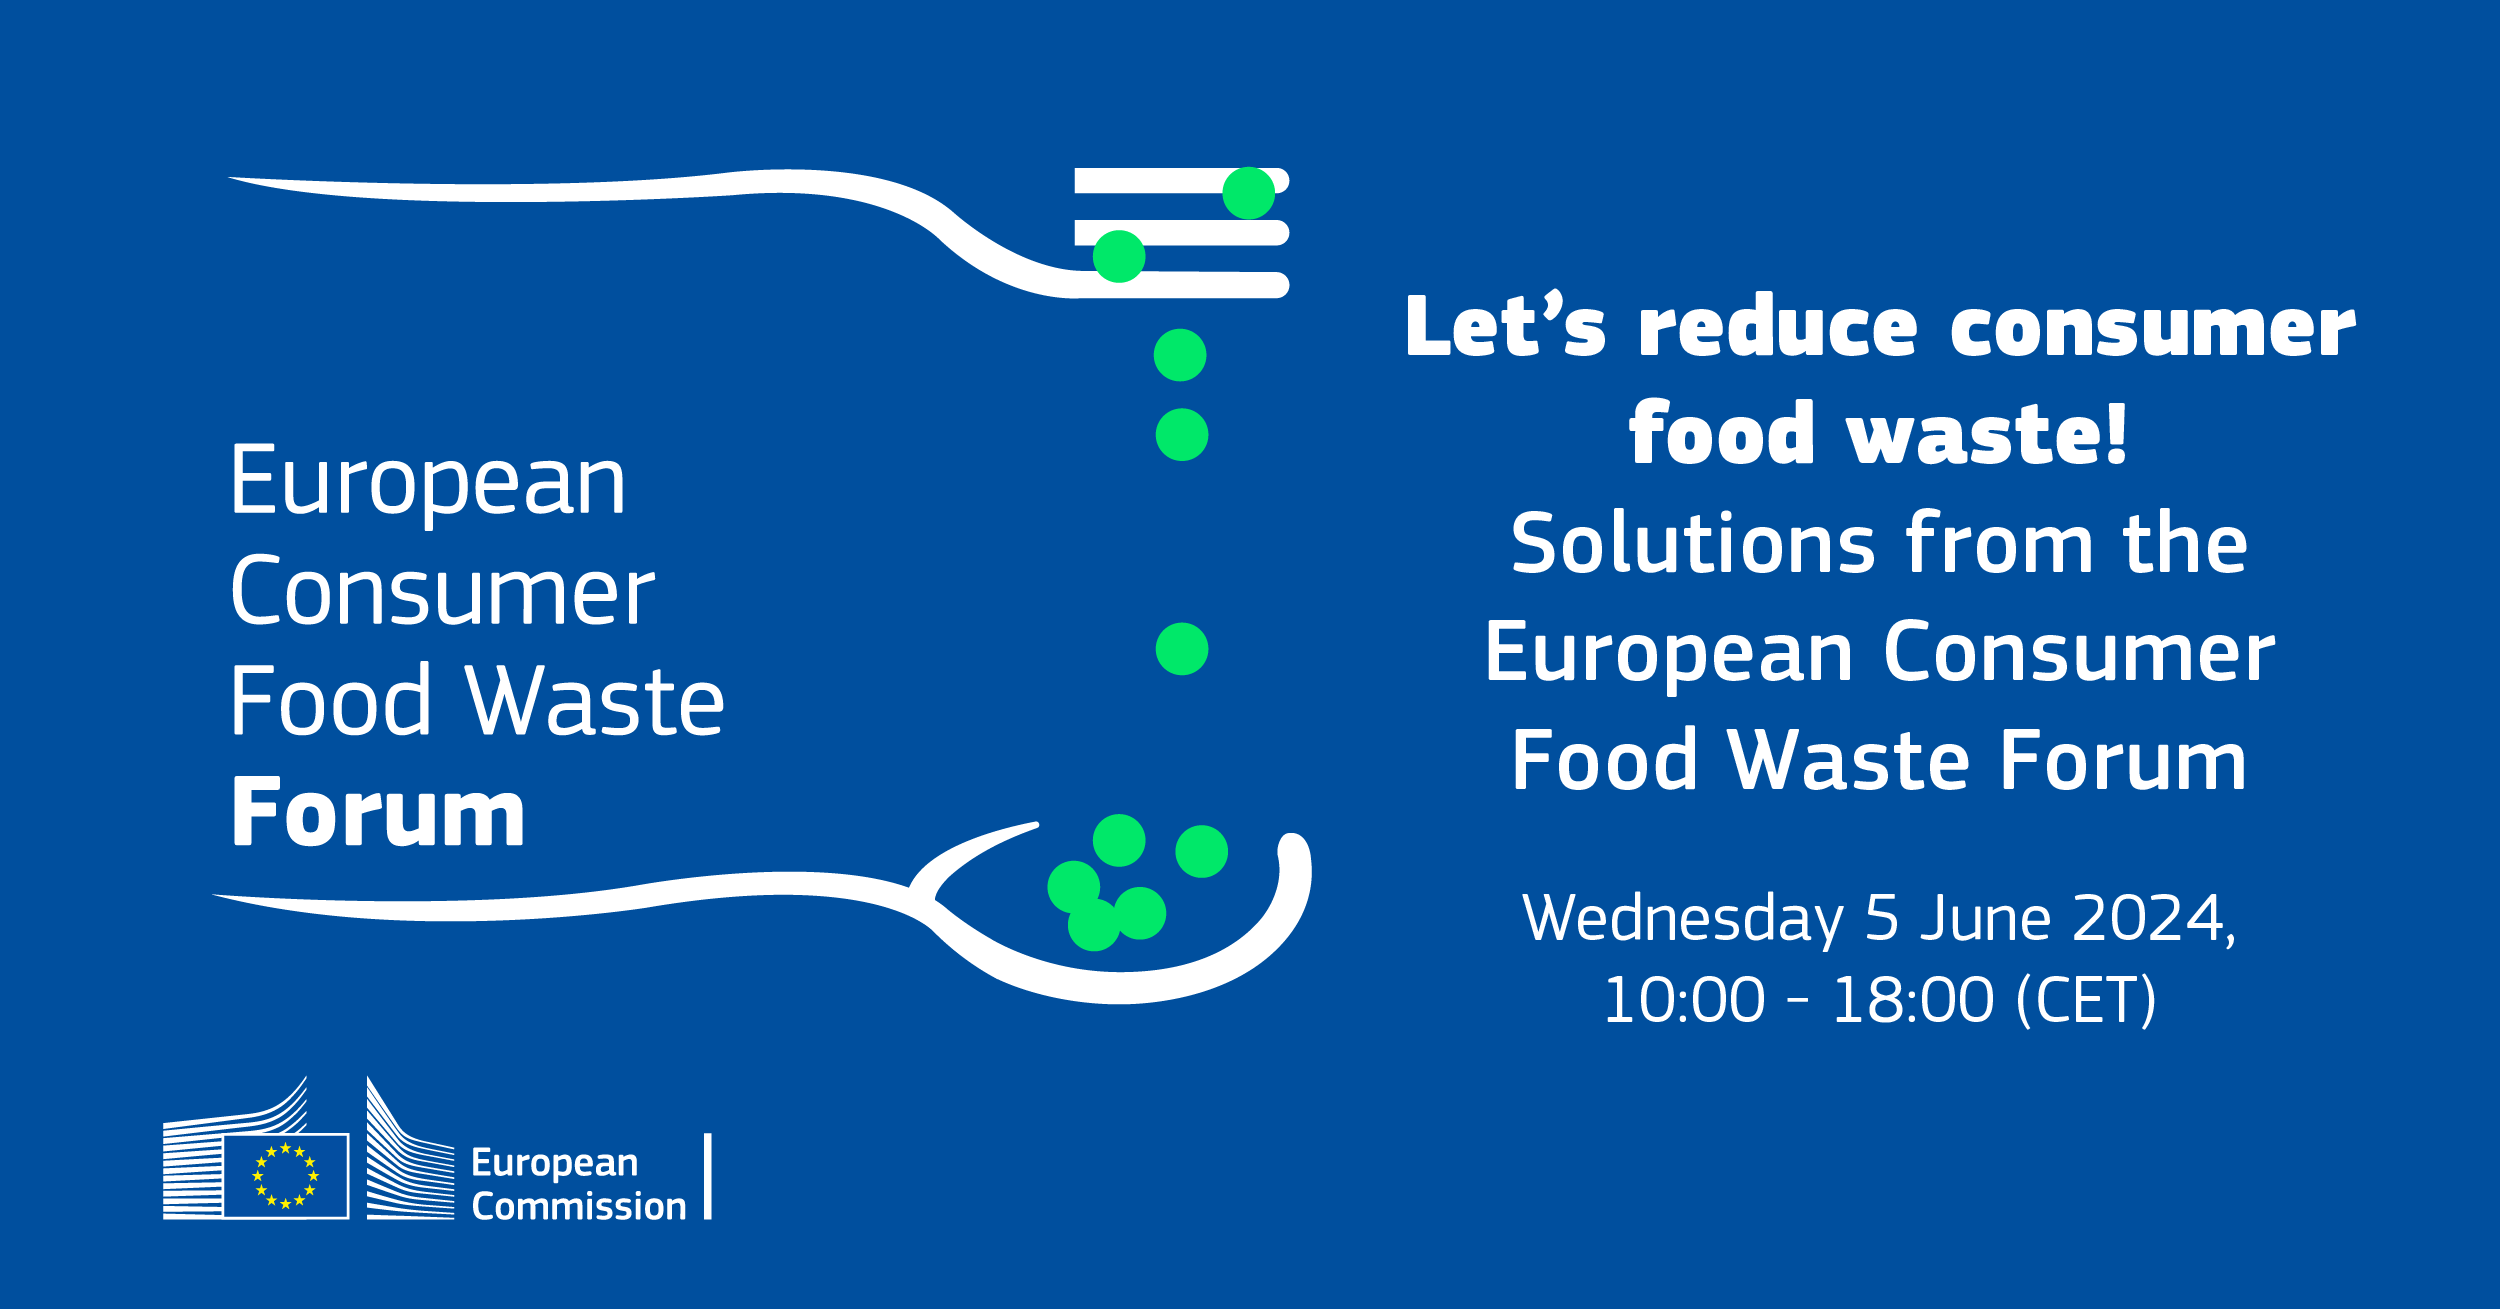 banner for: EU Food Loss and Waste Prevention Hub newsletter